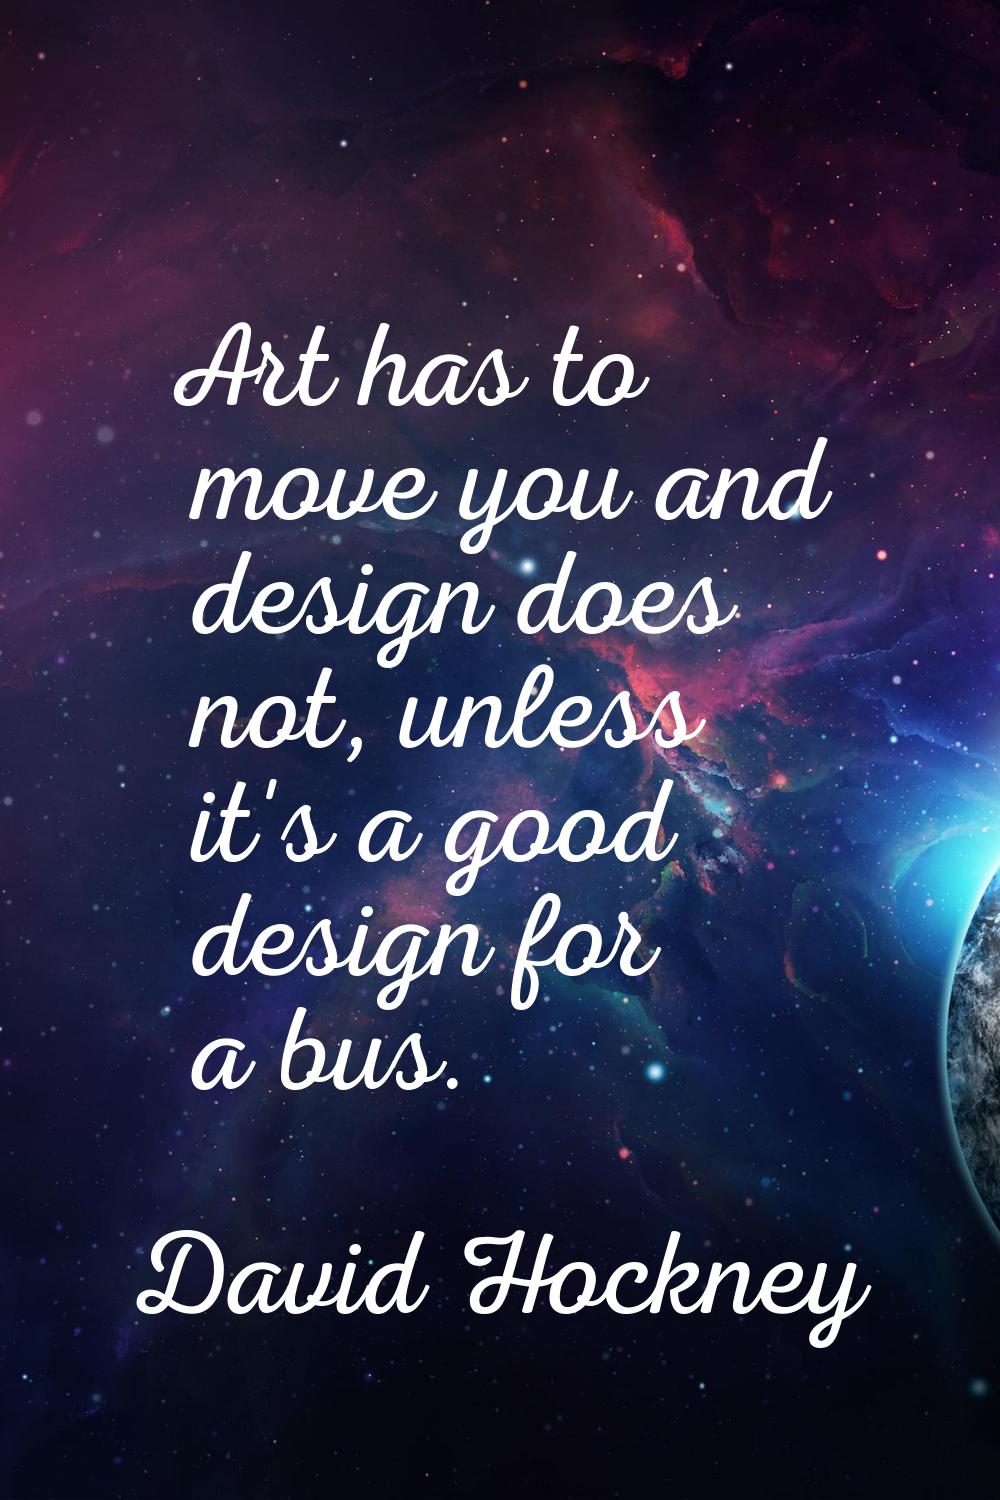 Art has to move you and design does not, unless it's a good design for a bus.